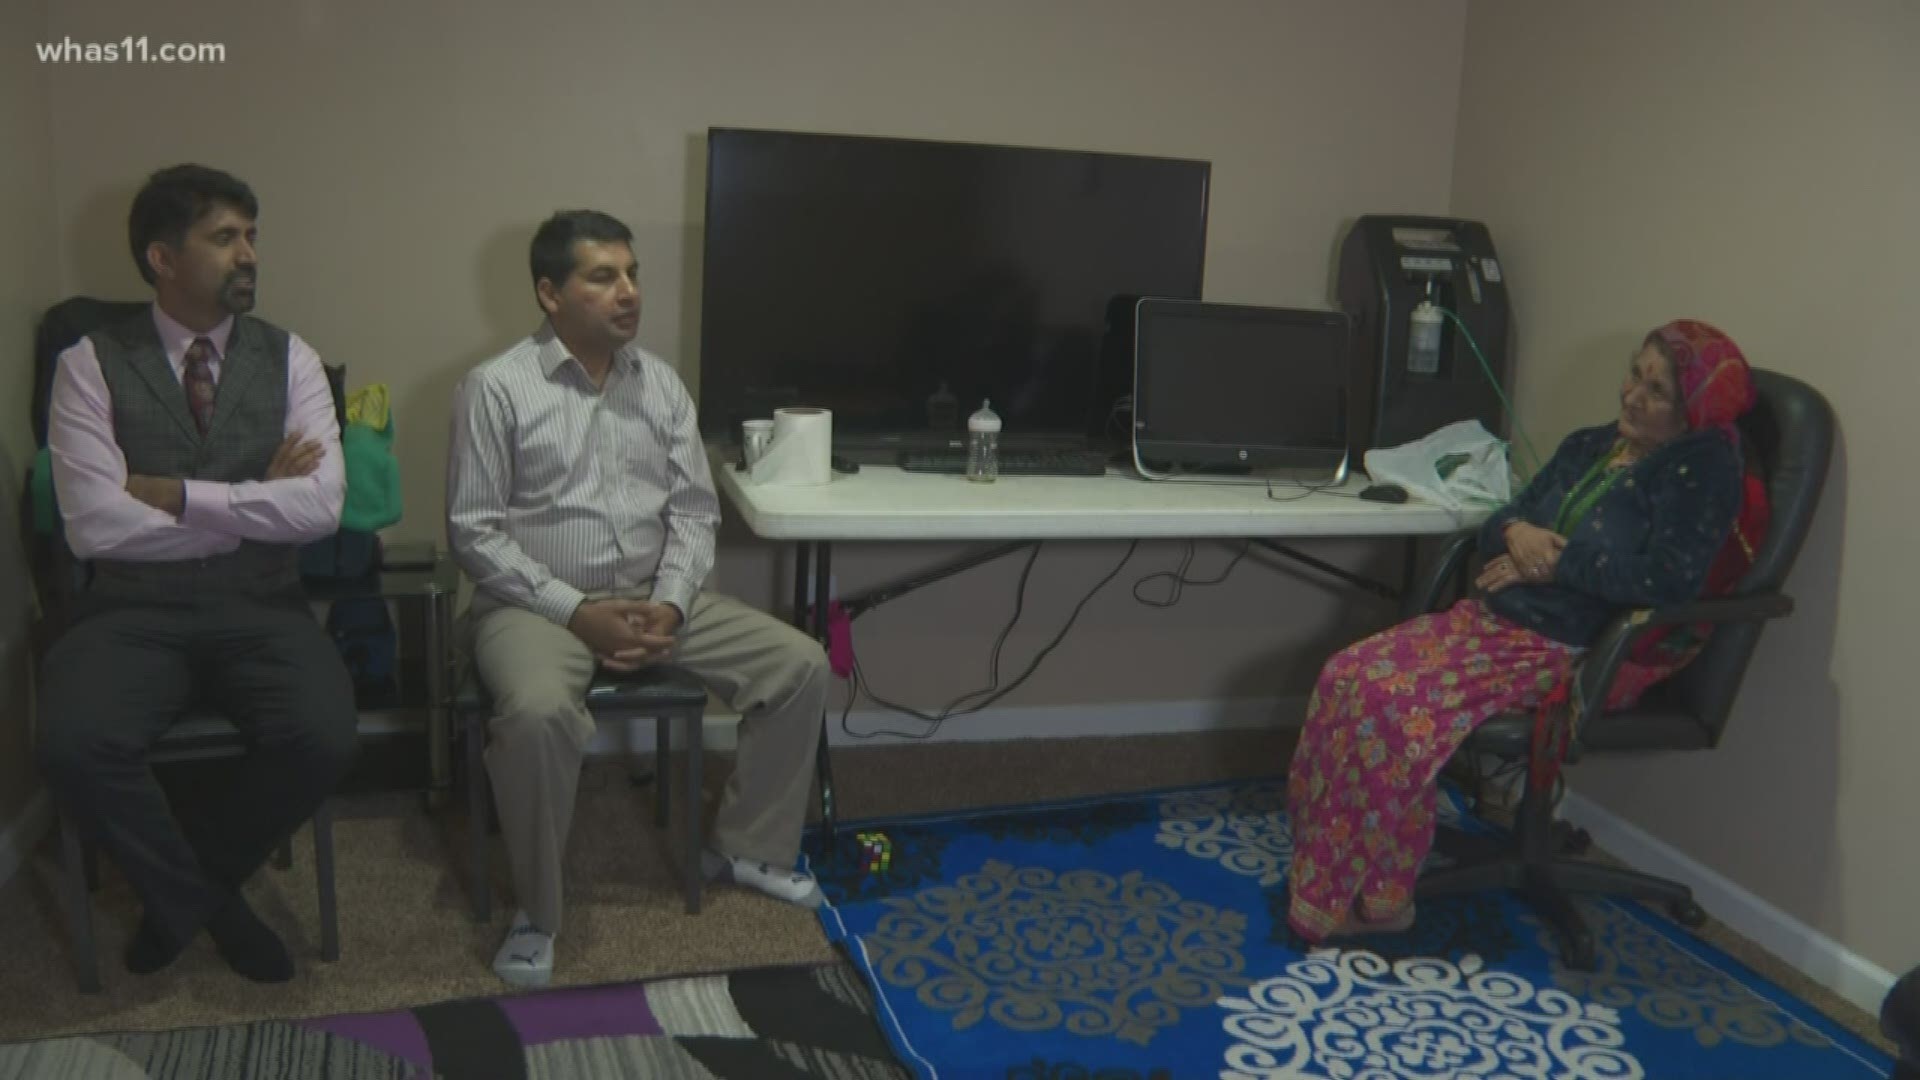 Dipendra Tiwari and Kishor Sapkota want to help their Nepali-speaking community through a home healthcare system. The state told them "no".